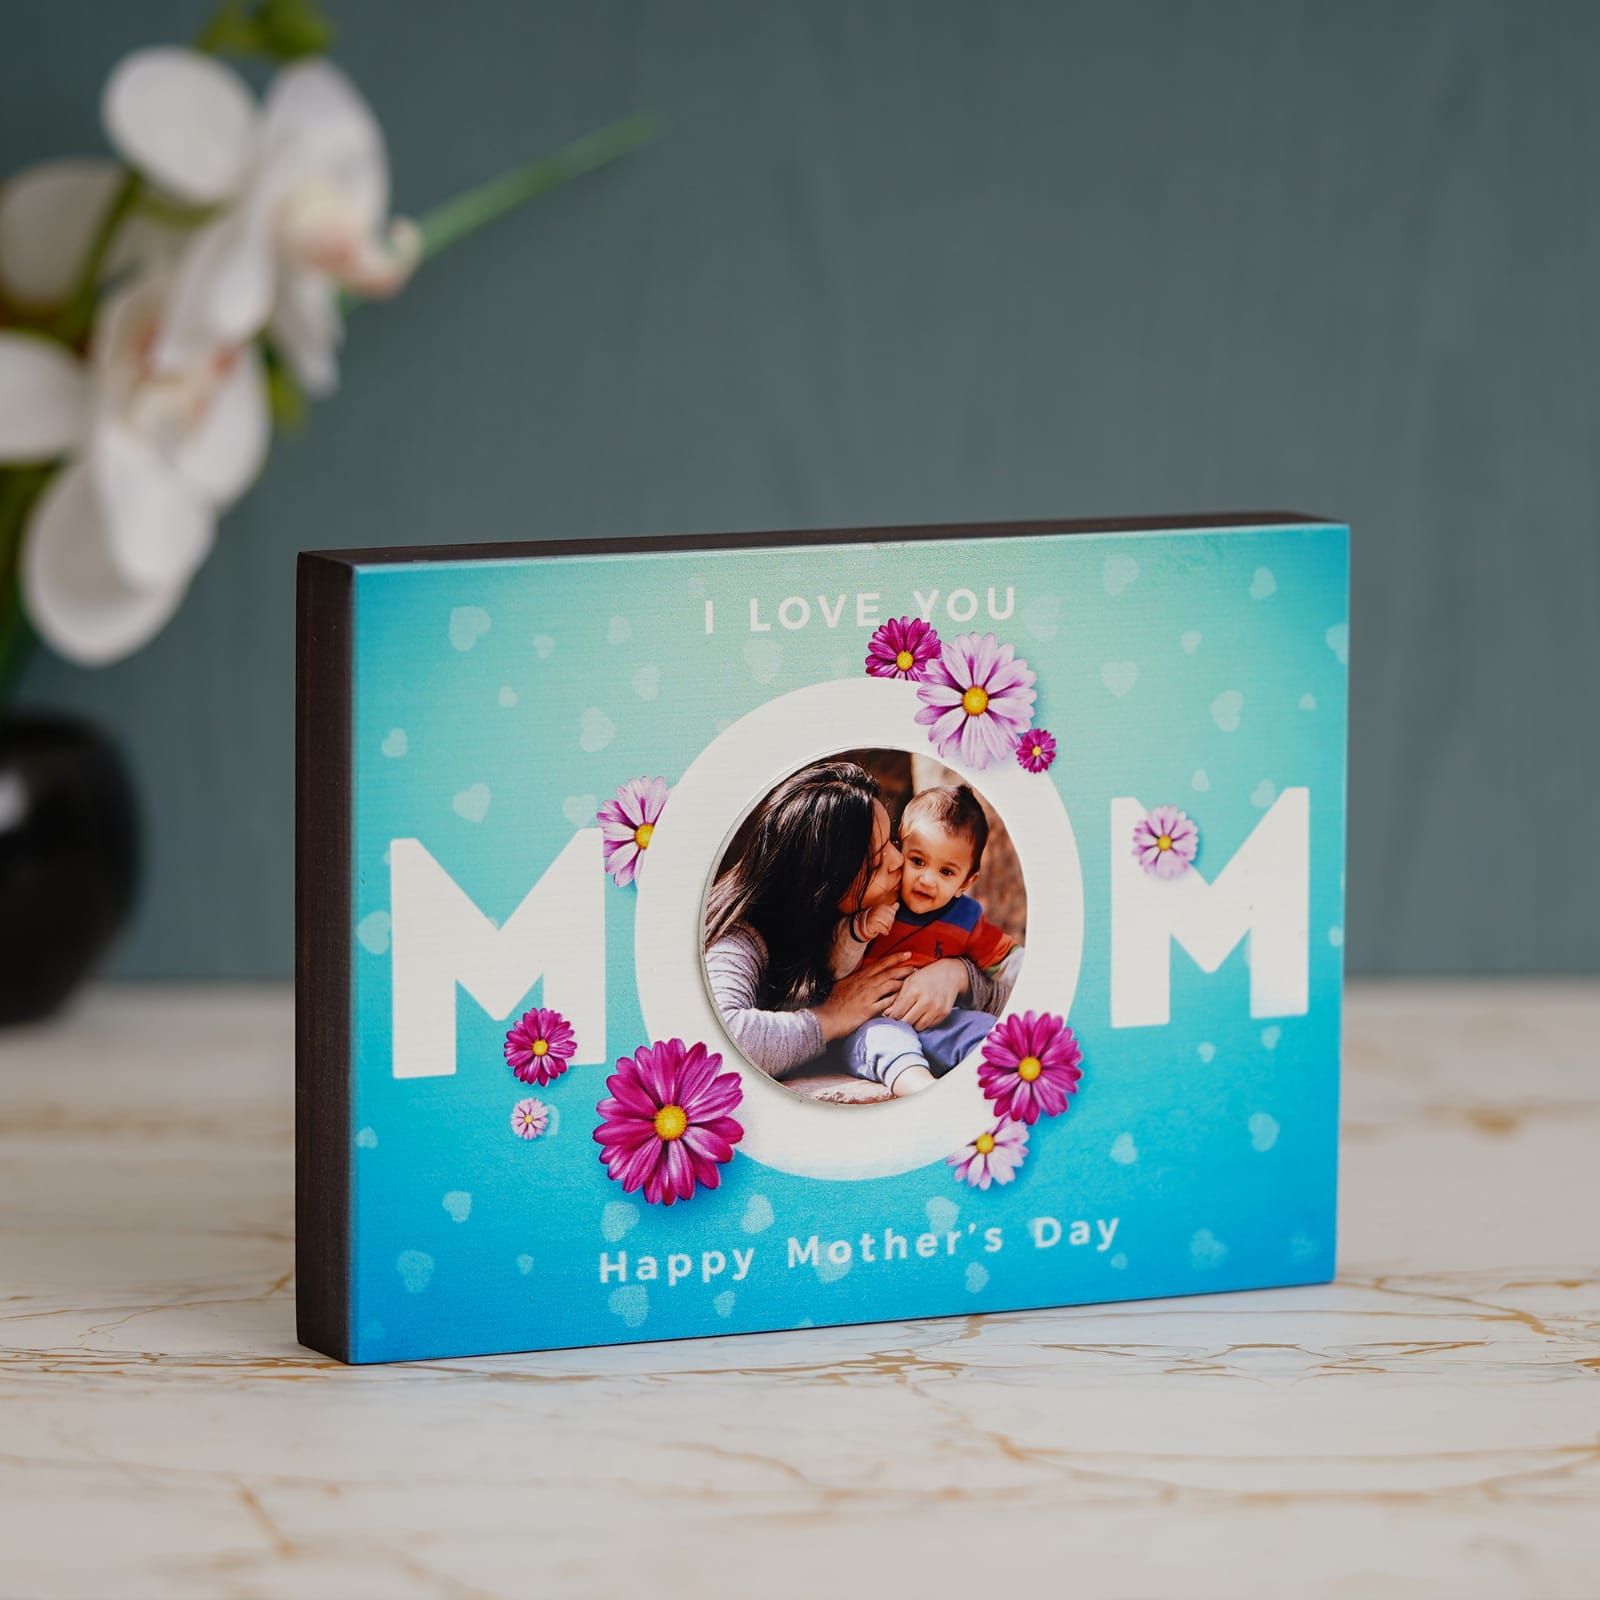 Easy DIY Dollar Tree Gift Ideas for the Special Mom in Your Life